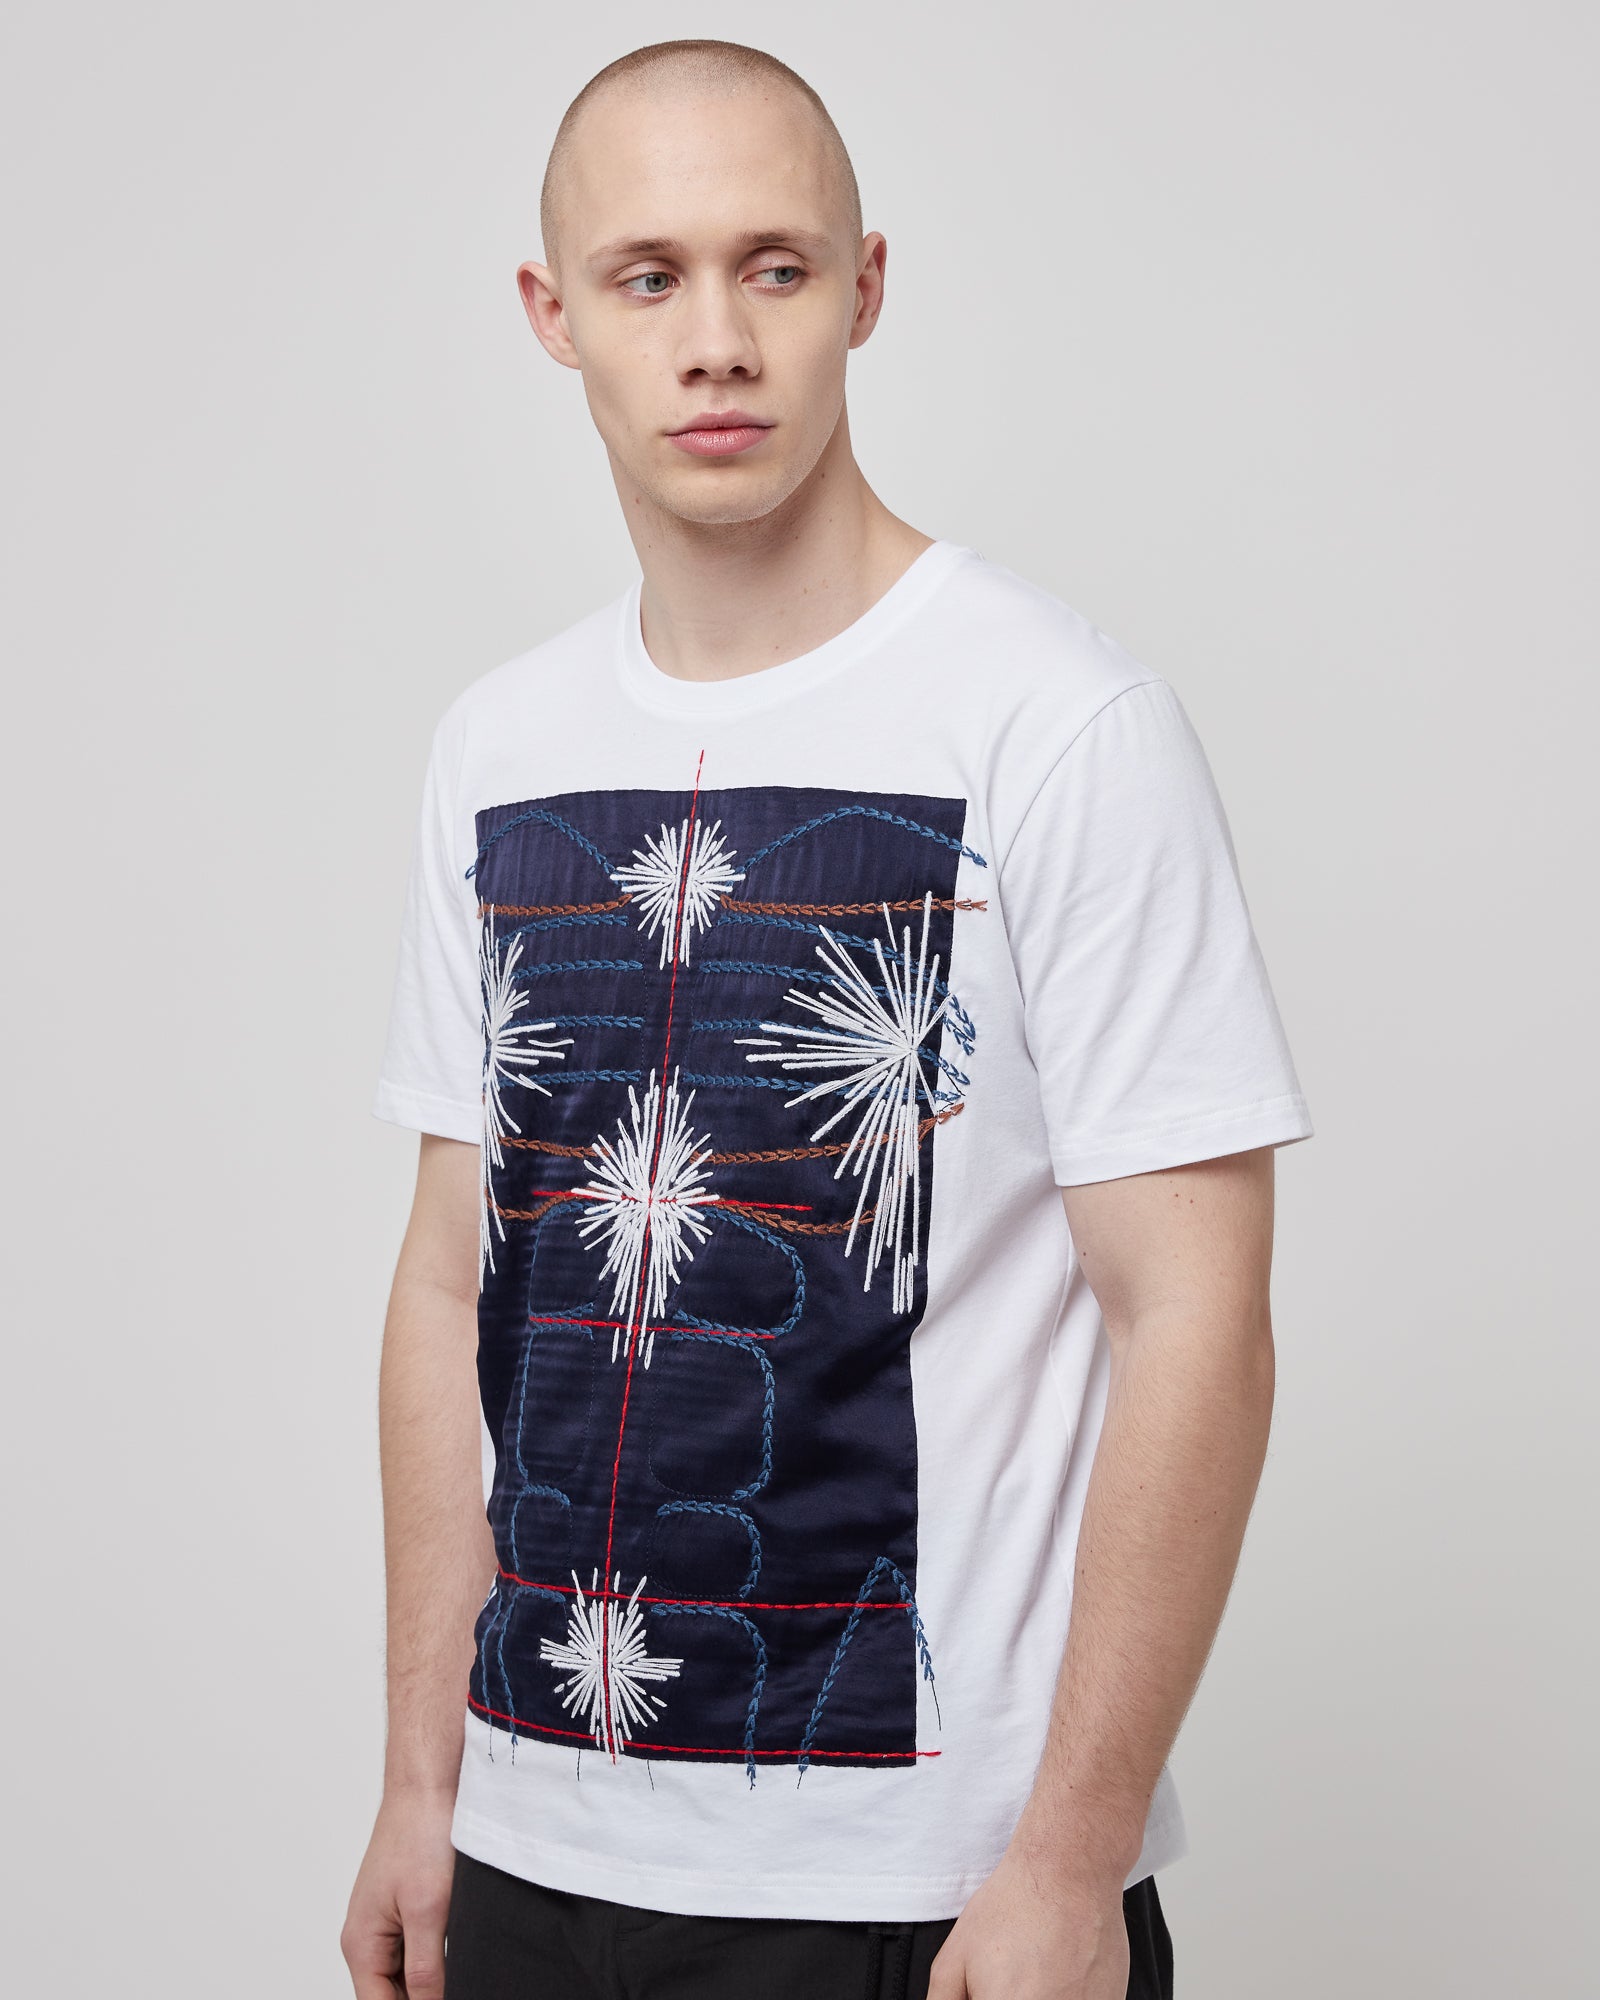 Embroidered Body T-Shirt in Navy